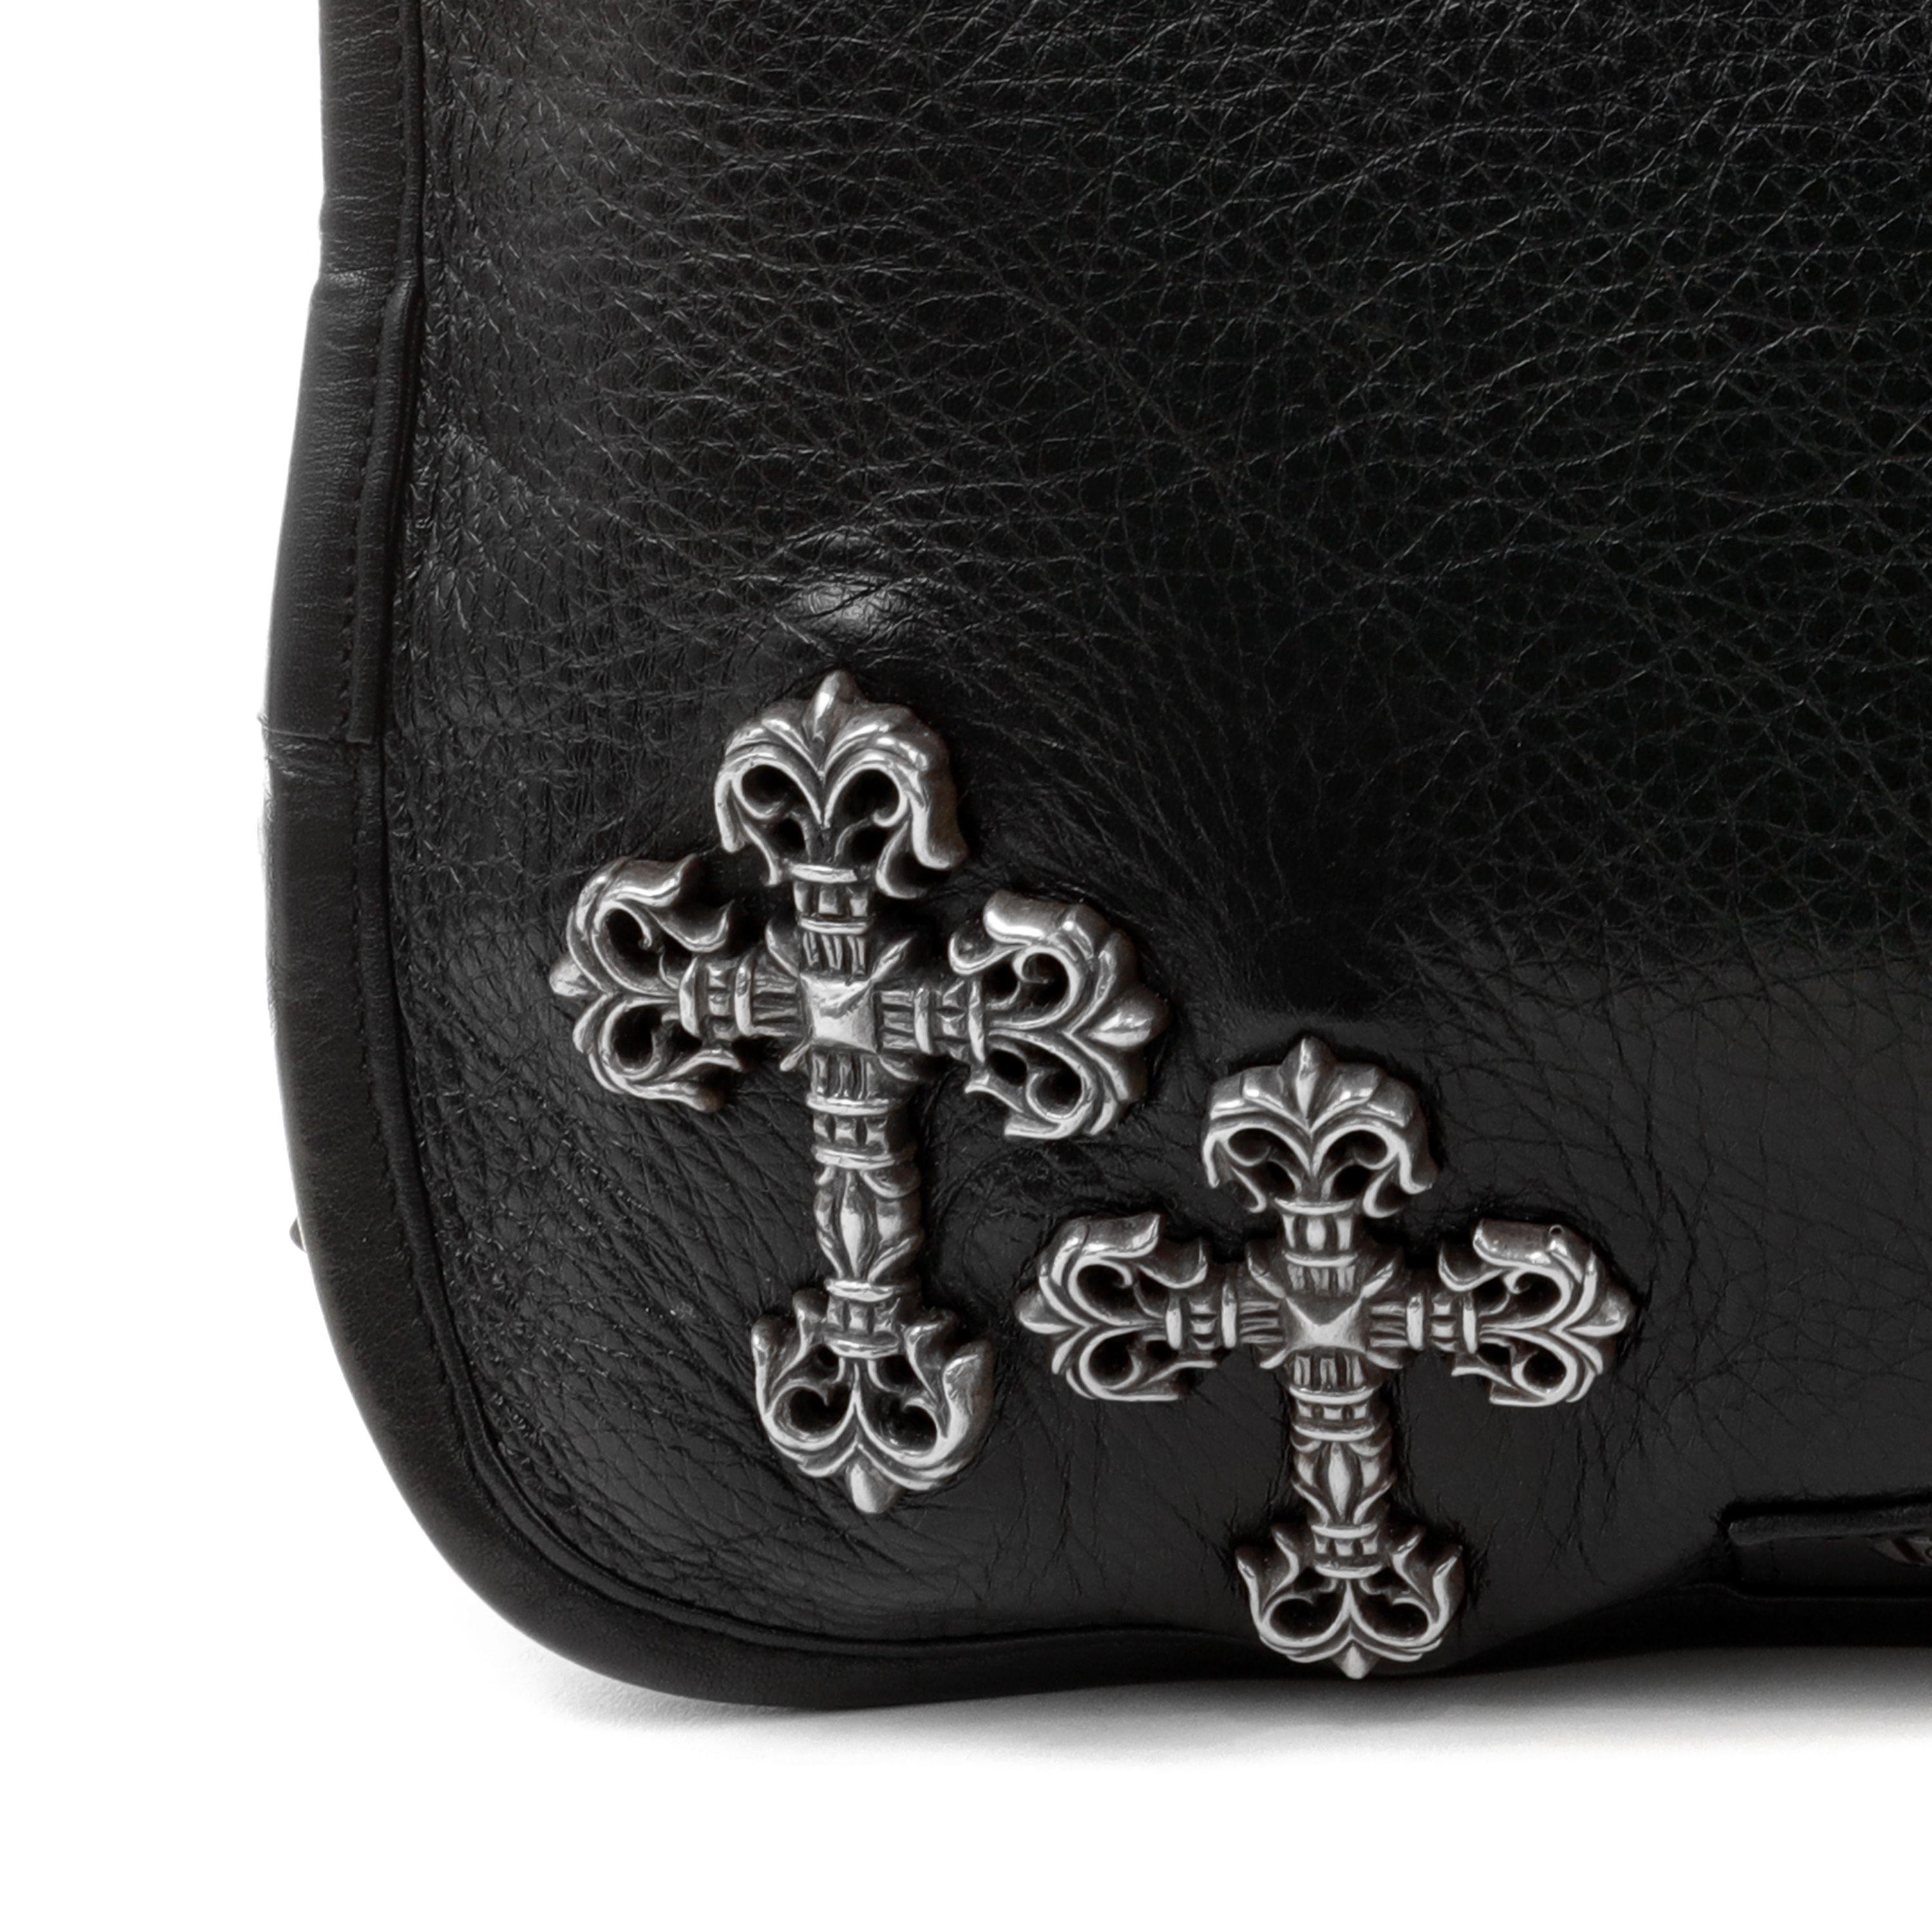 This authentic Chrome Hearts Black Leather Small Briefcase is in pristine condition.  Textured black leather with dark silver hardware and fluted point cross embellishments.  


PBF 14042